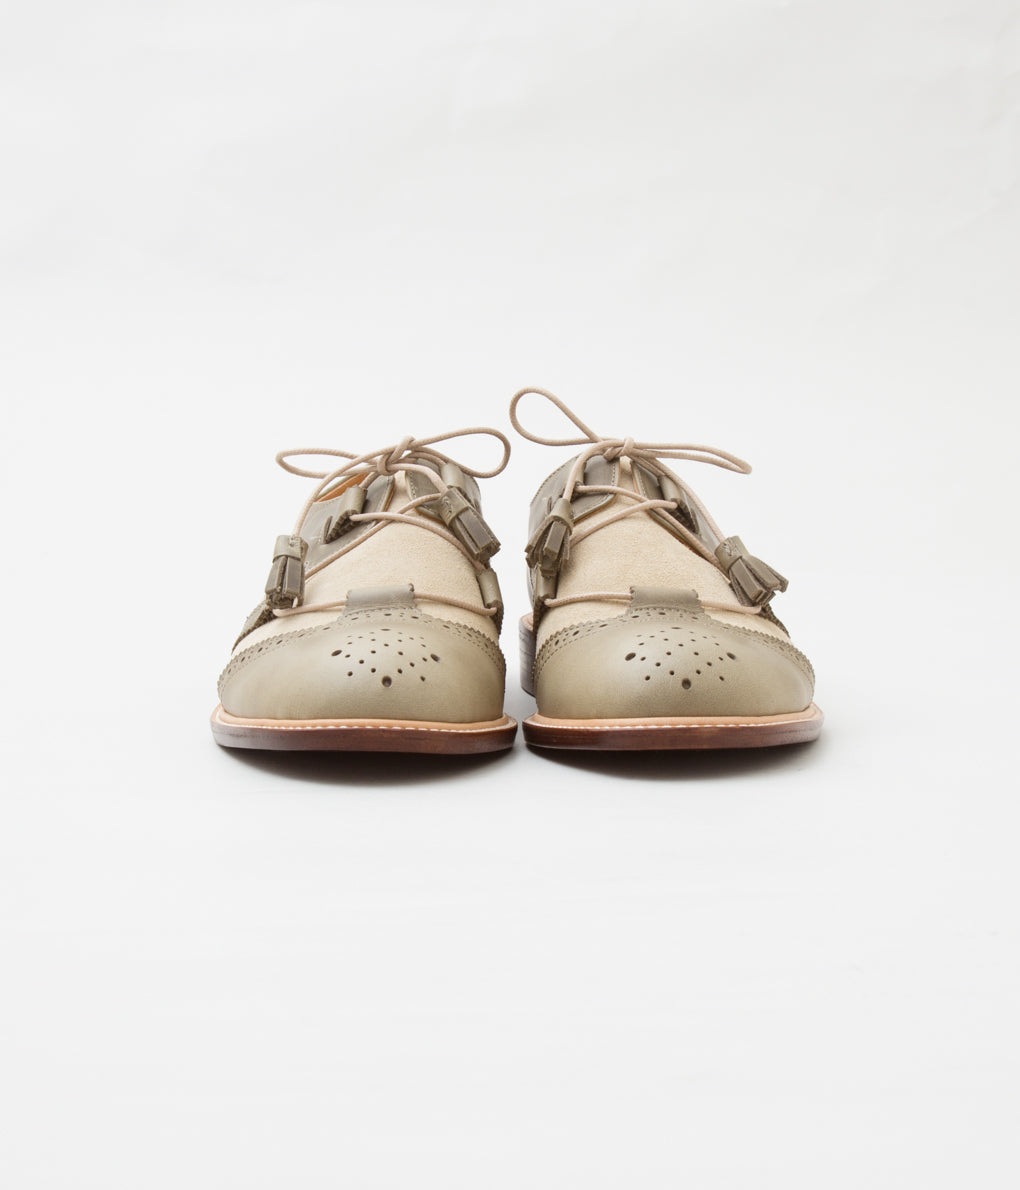 THE OLD CURIOSITY SHOP "#13843 CLASSIC GILLIE SHOES"(OLIVE)